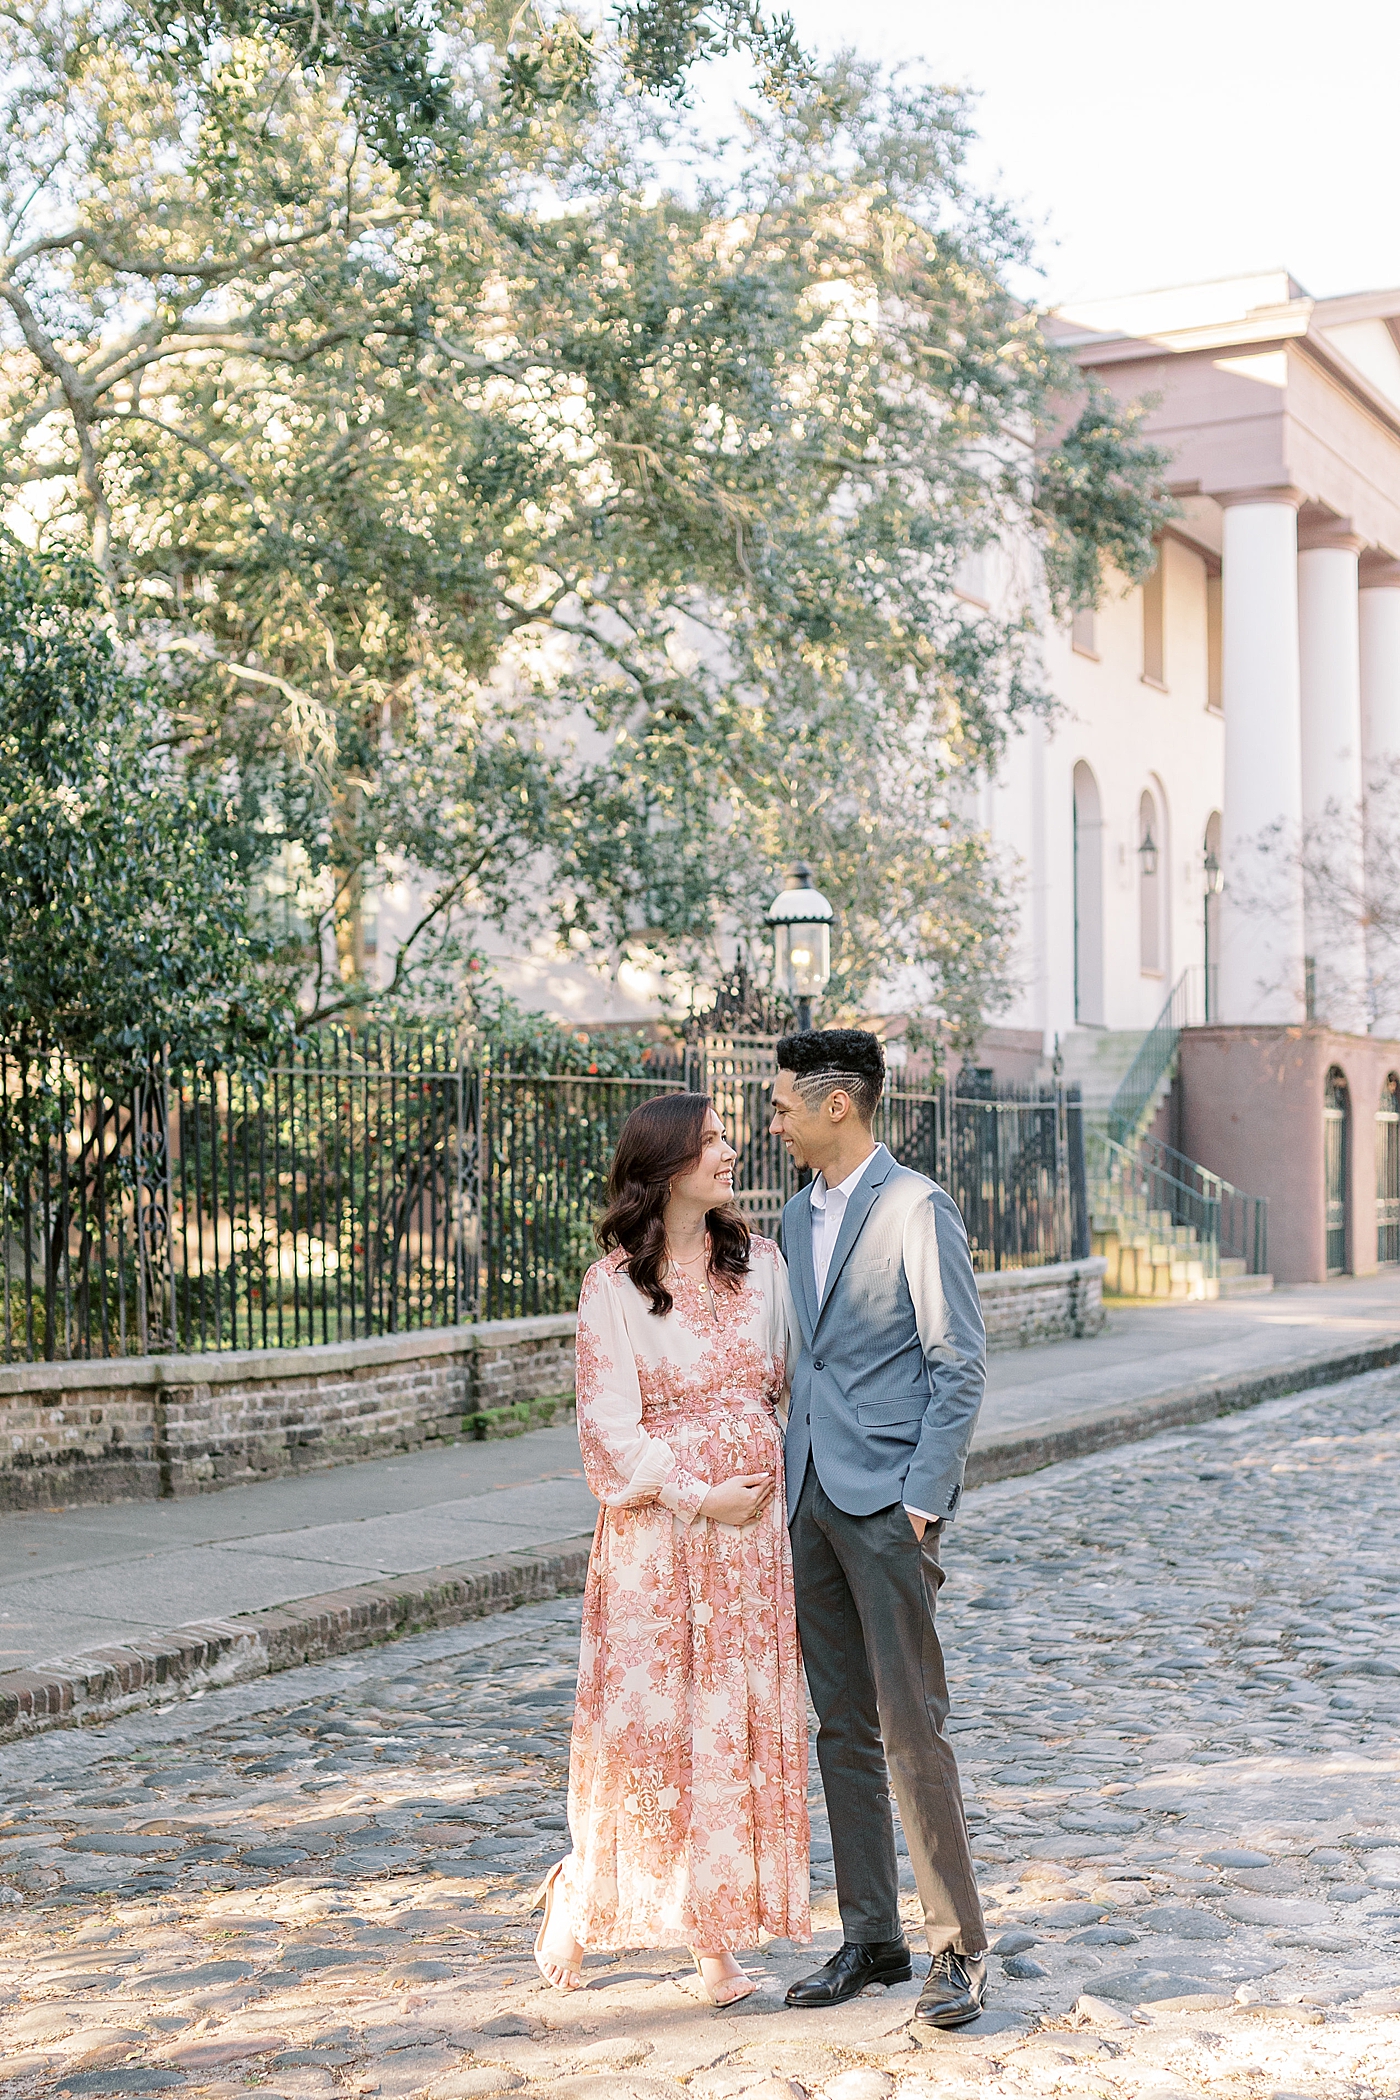 Mom and dad to be on a cobblestone street during their Pregnancy Announcement in Downtown Charleston | Photo by Caitlyn Motycka Photography